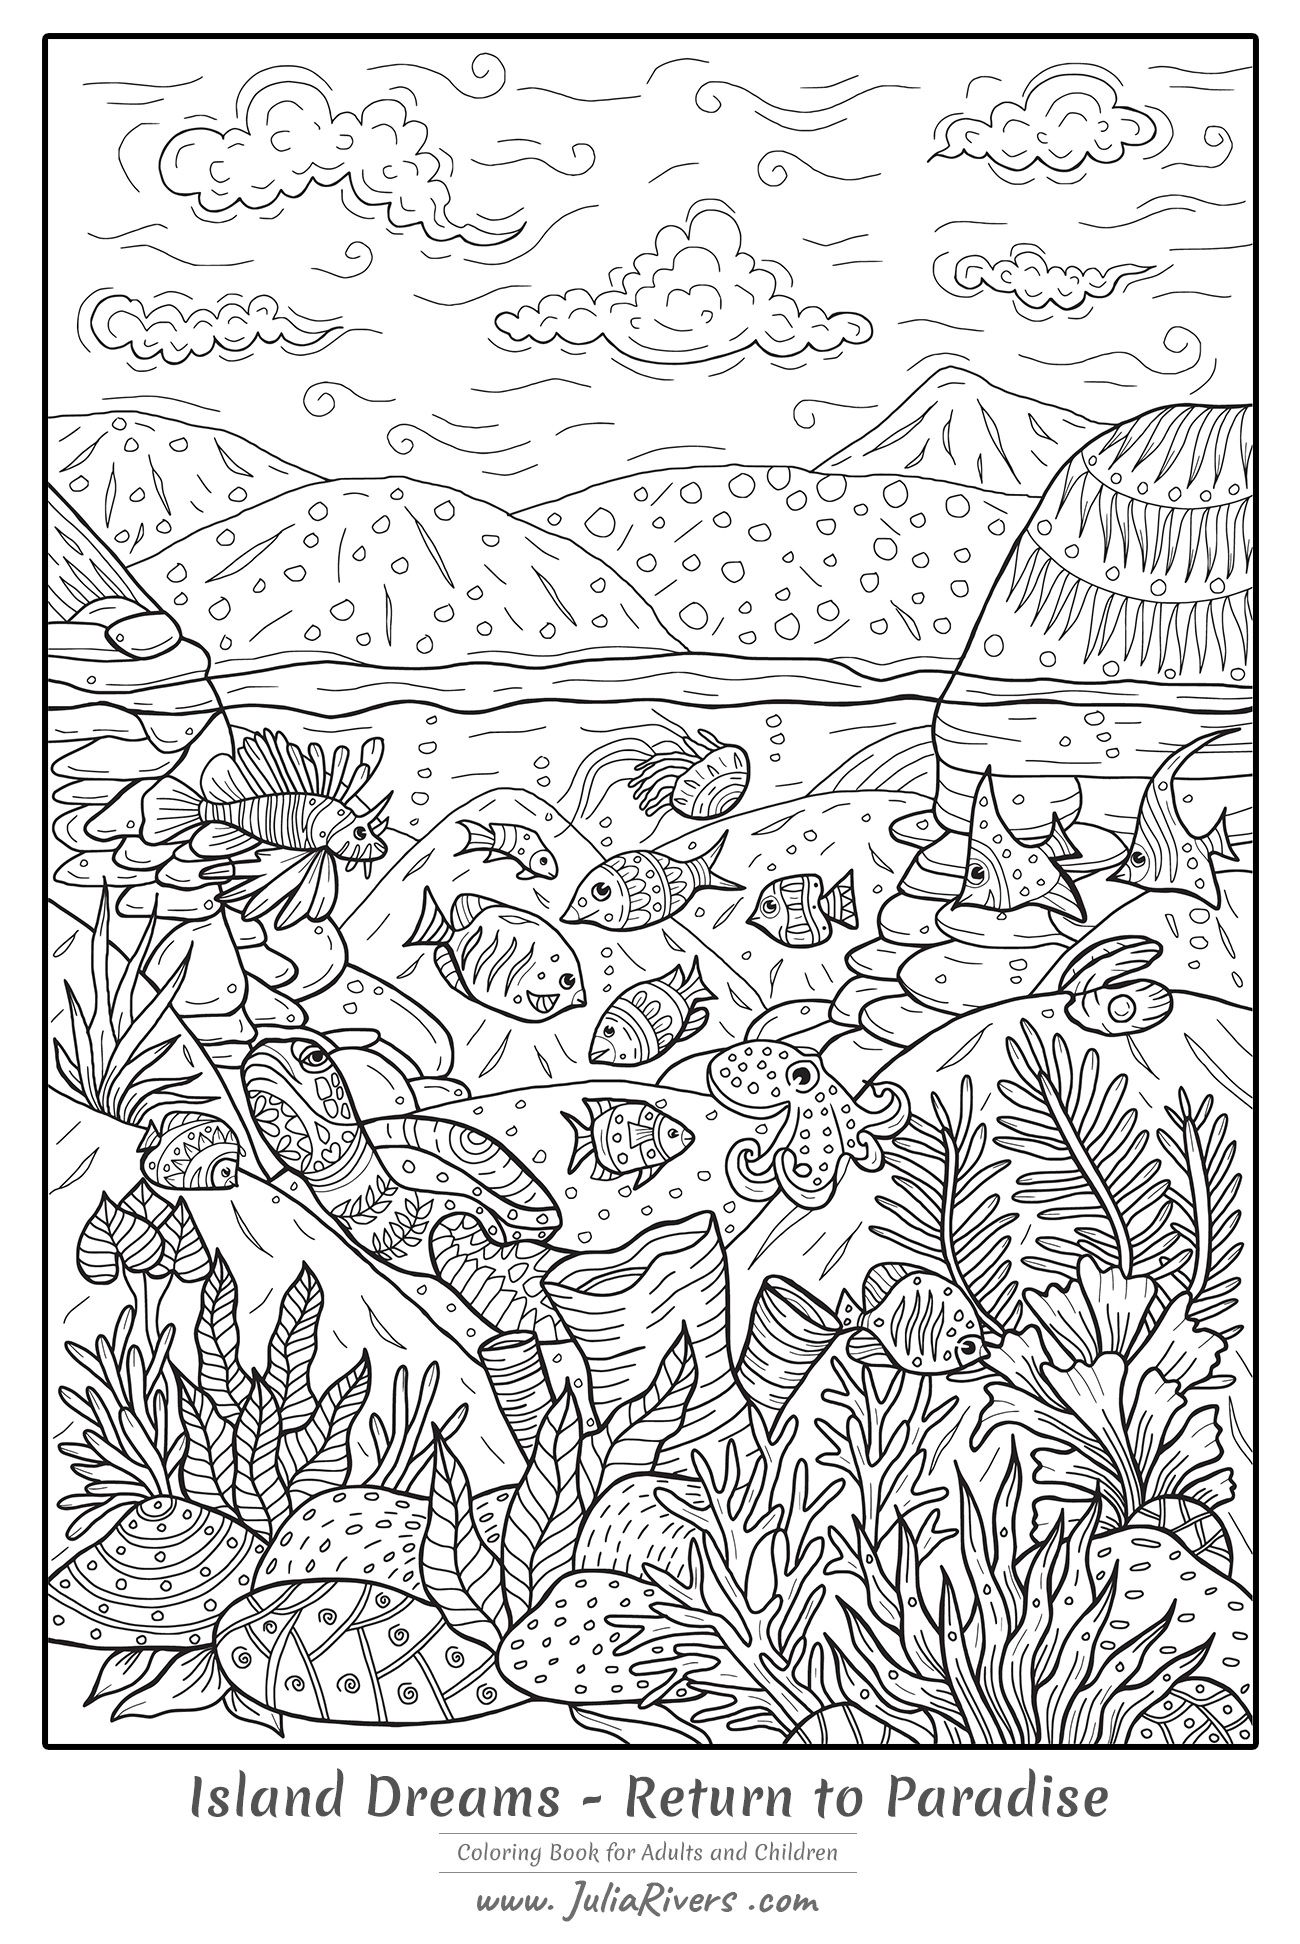 Island dreams return to padise coloring page full of aquatic creatures and plant species â coloring book pages adult coloring pages bird coloring pages